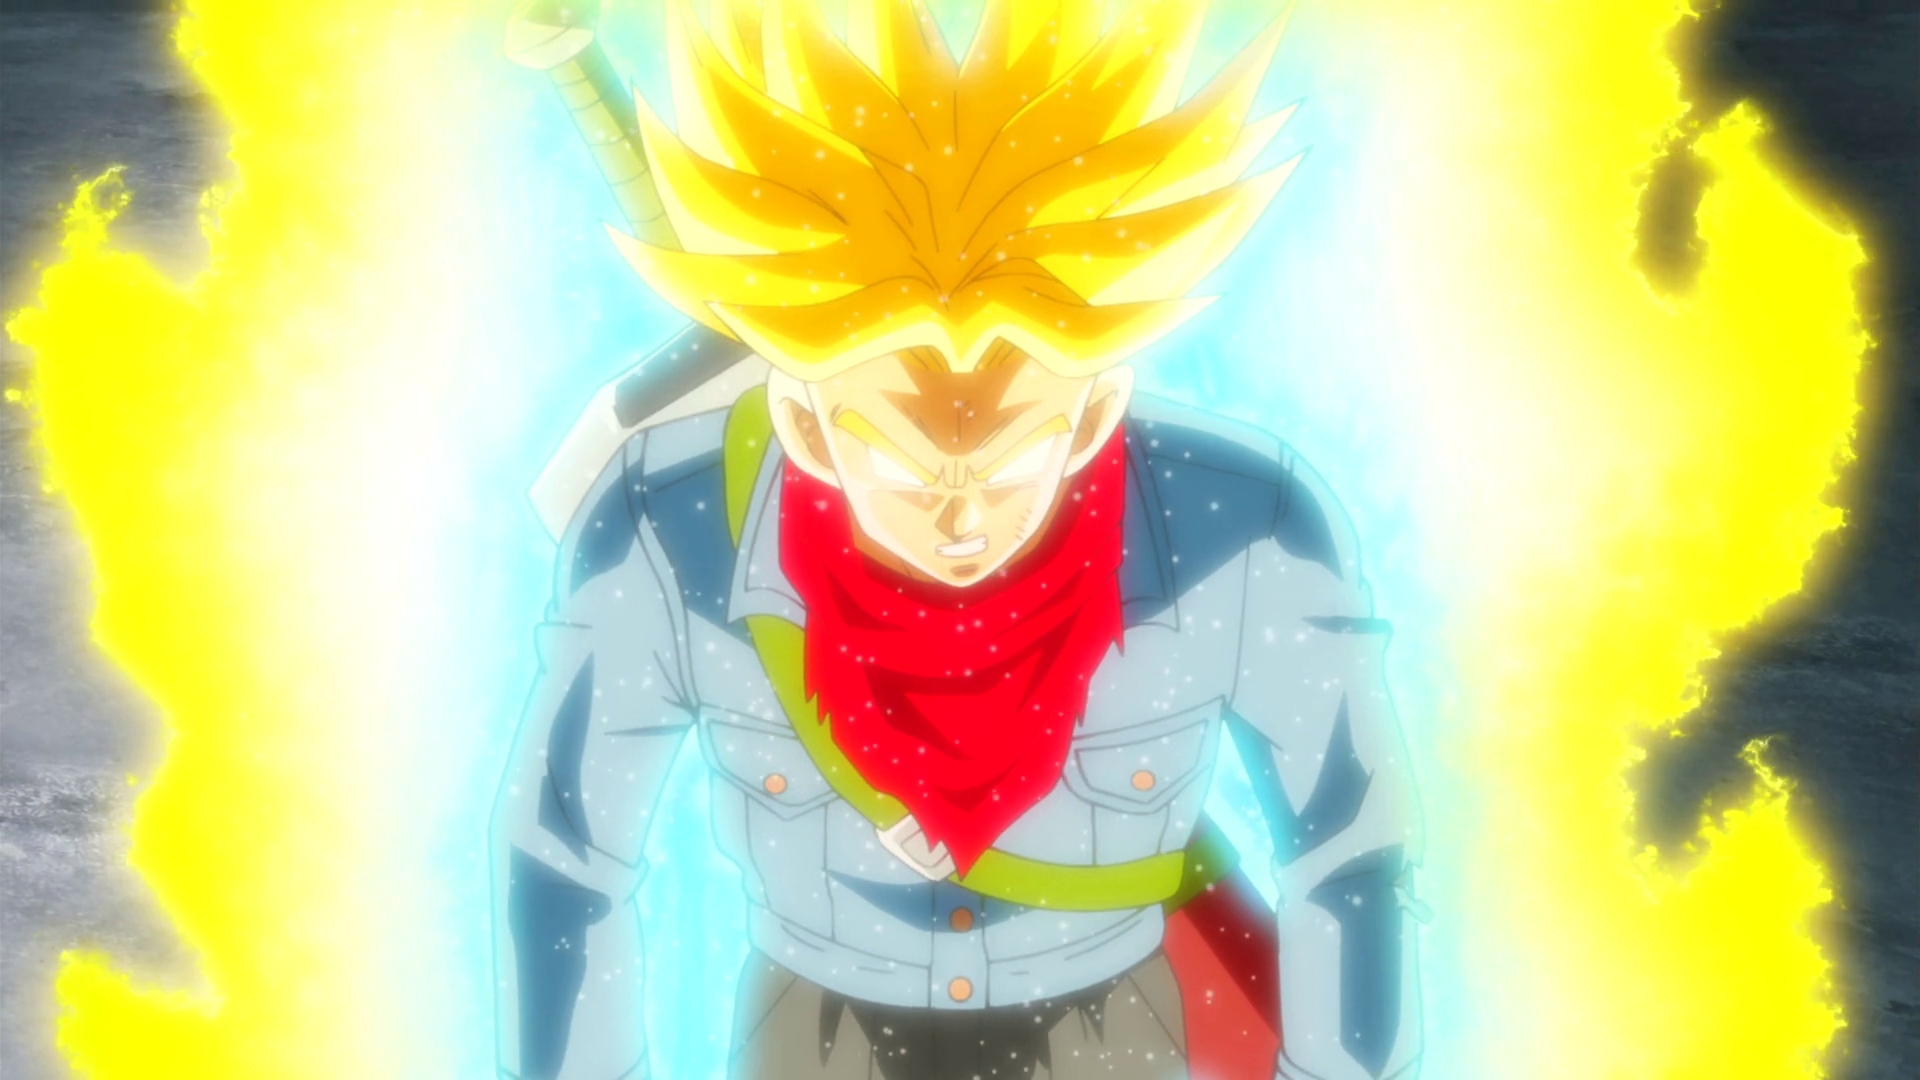 Super Saiyan Rage vs Super Saiyan God: Which form does Trunks look better with?. Discussion